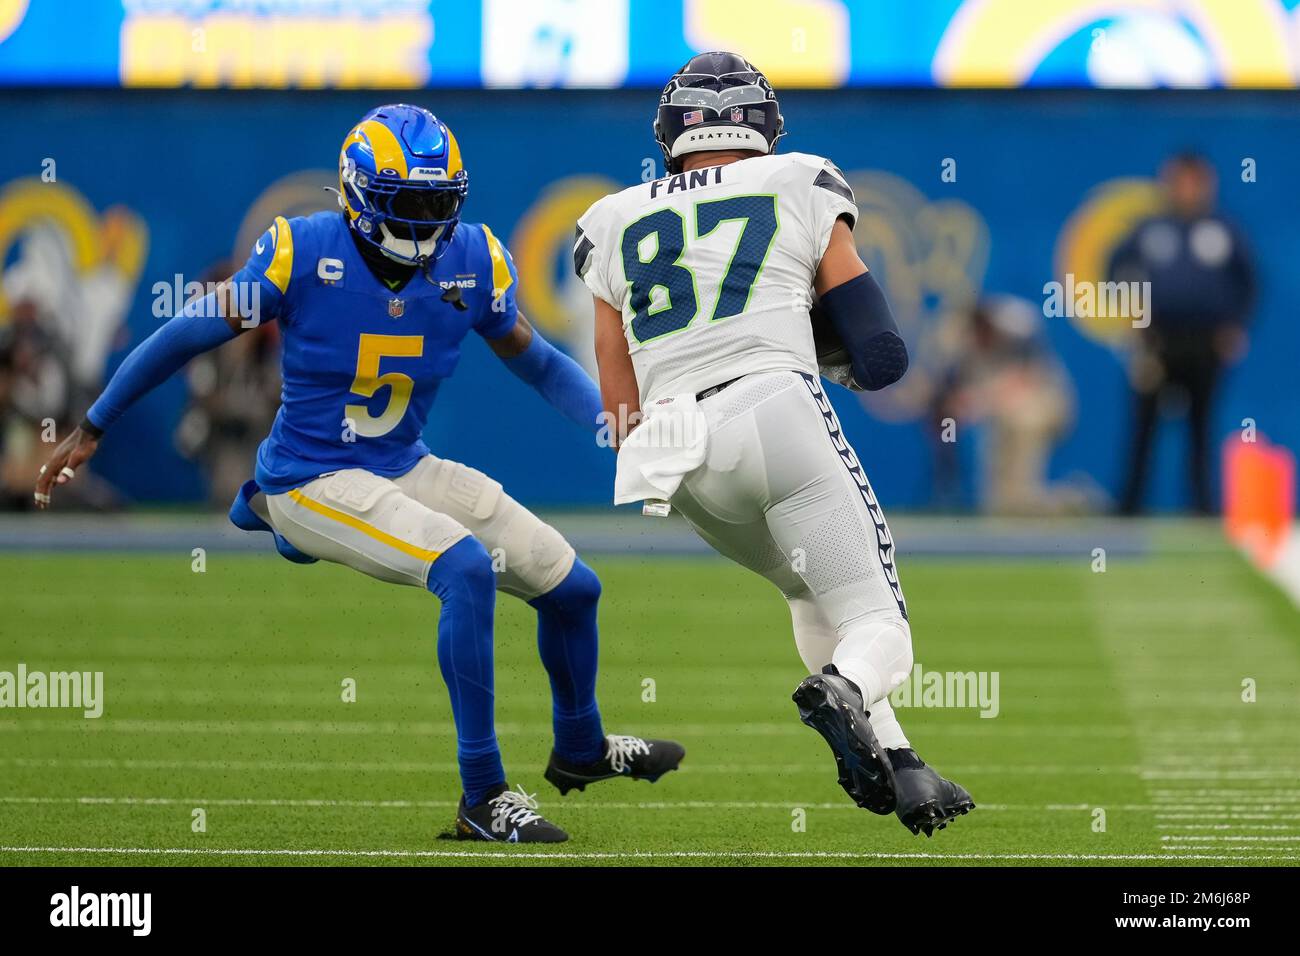 Seattle Seahawks tight end Colby Parkinson (84) catches a pass and gets tackled by Los Angeles Rams cornerback Jalen Ramsey (5) during a NFL football Stock Photo